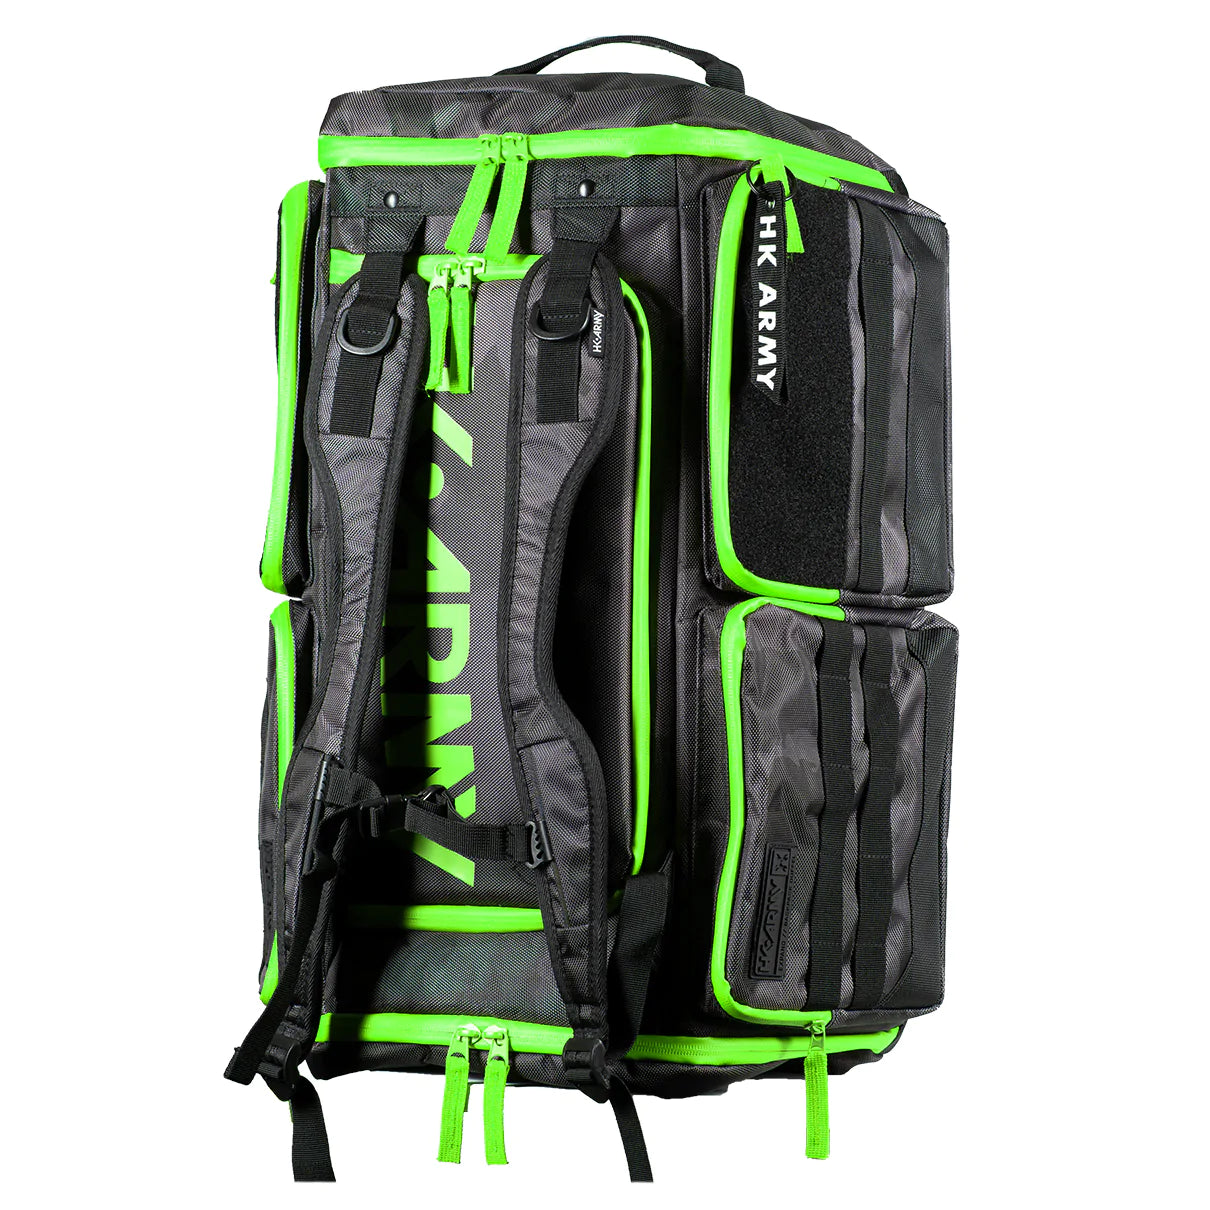 Expand 35L - Backpack - Shroud Black/Green | Paintball Gear Bag | Hk Army